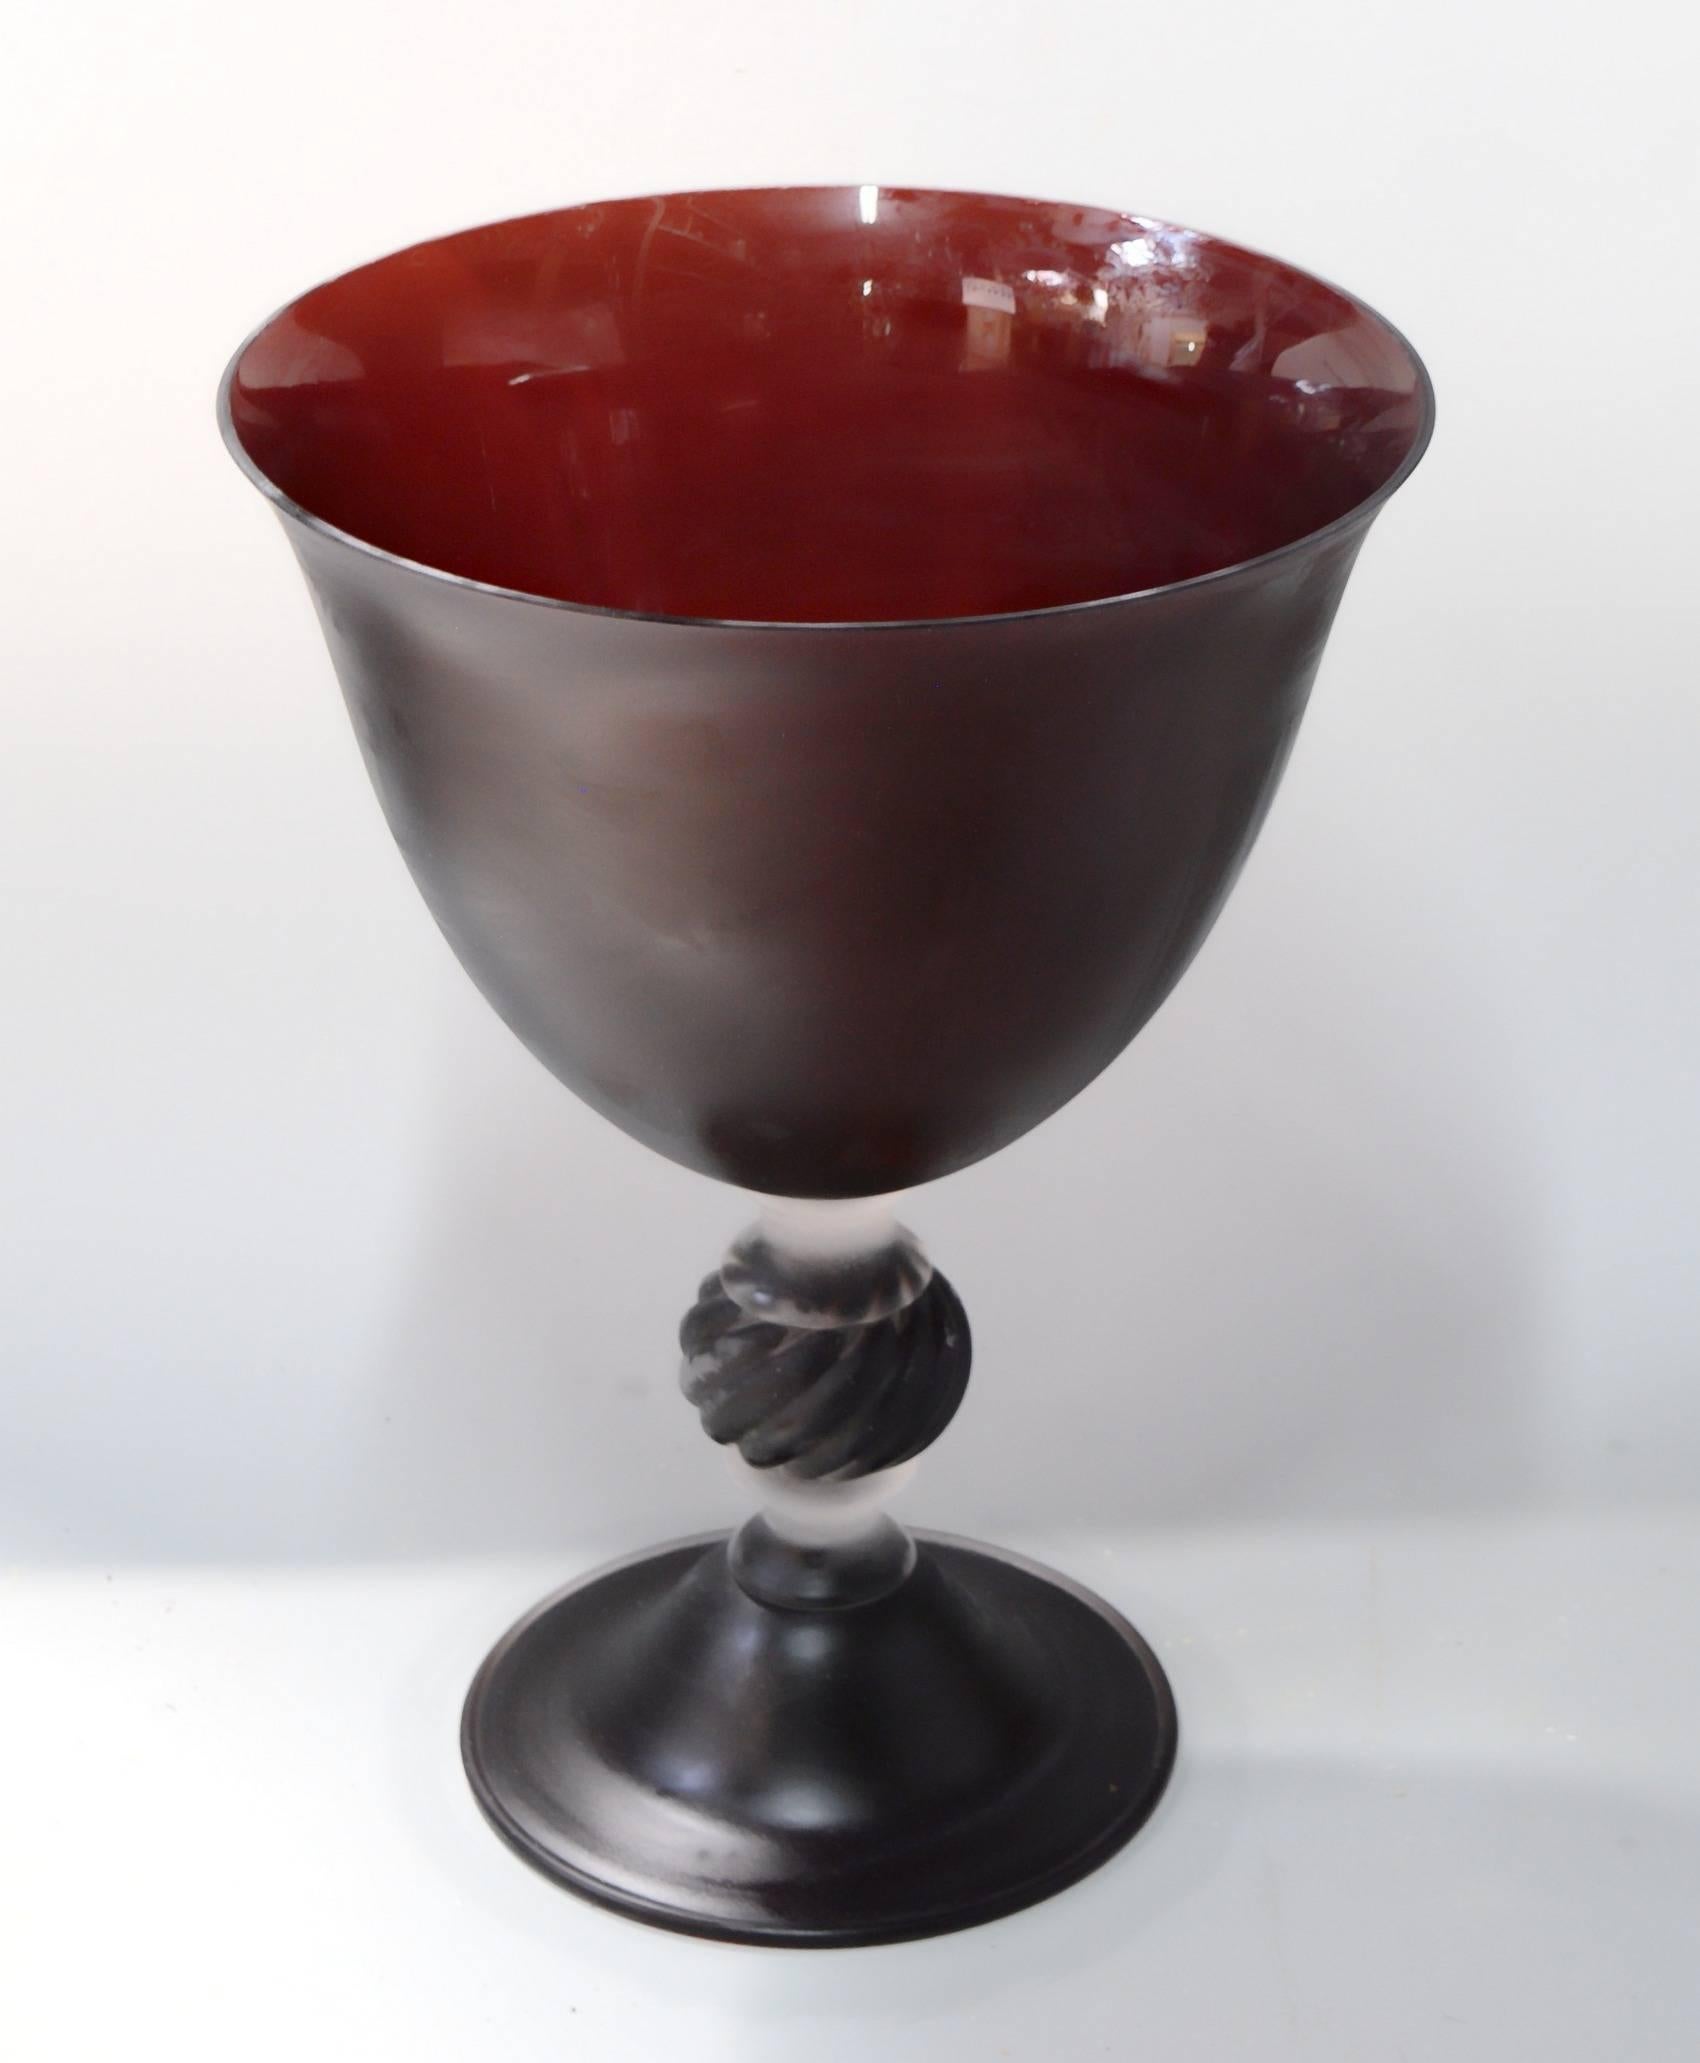 Grand footed vase from the 1980s, has a magnificent carmine burnt red or deep topaz color that looks almost black from distance. 

A fantastic piece to dress a modern entrance or a living room.

Identification and evaluation: The color is the